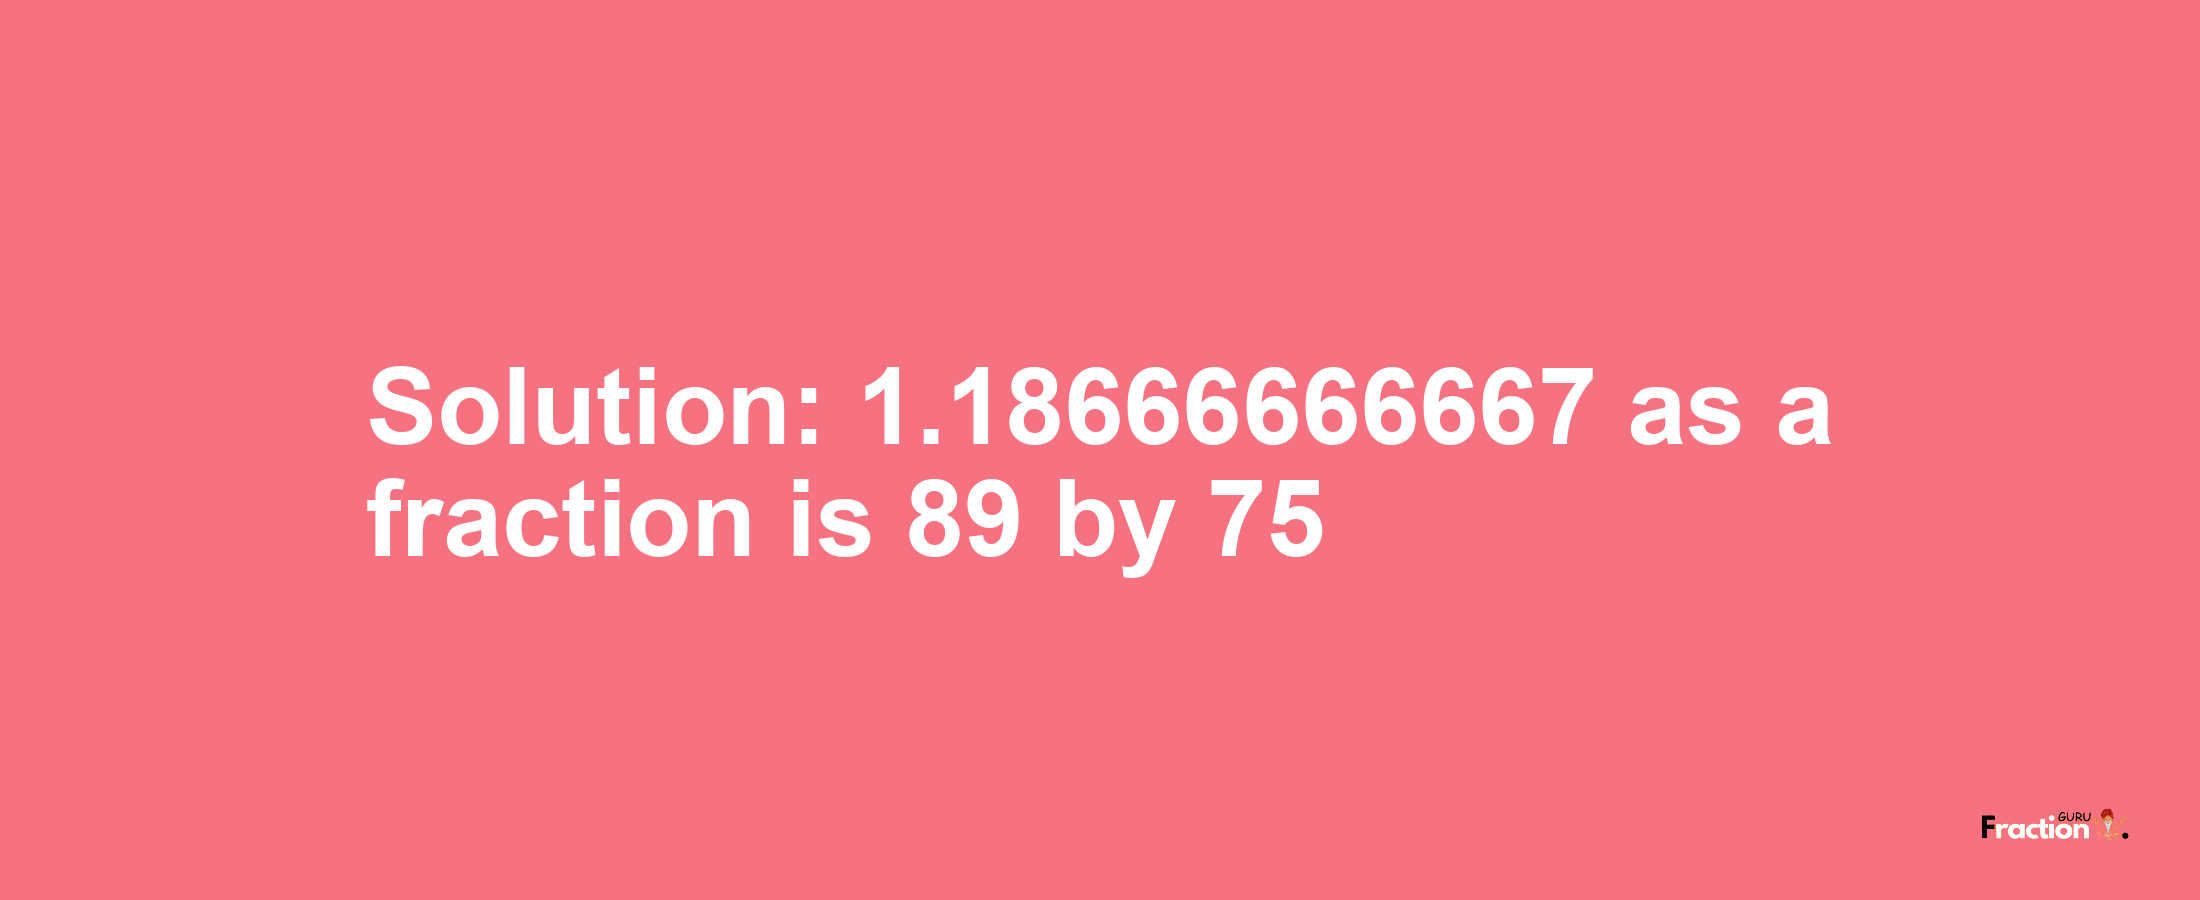 Solution:1.18666666667 as a fraction is 89/75